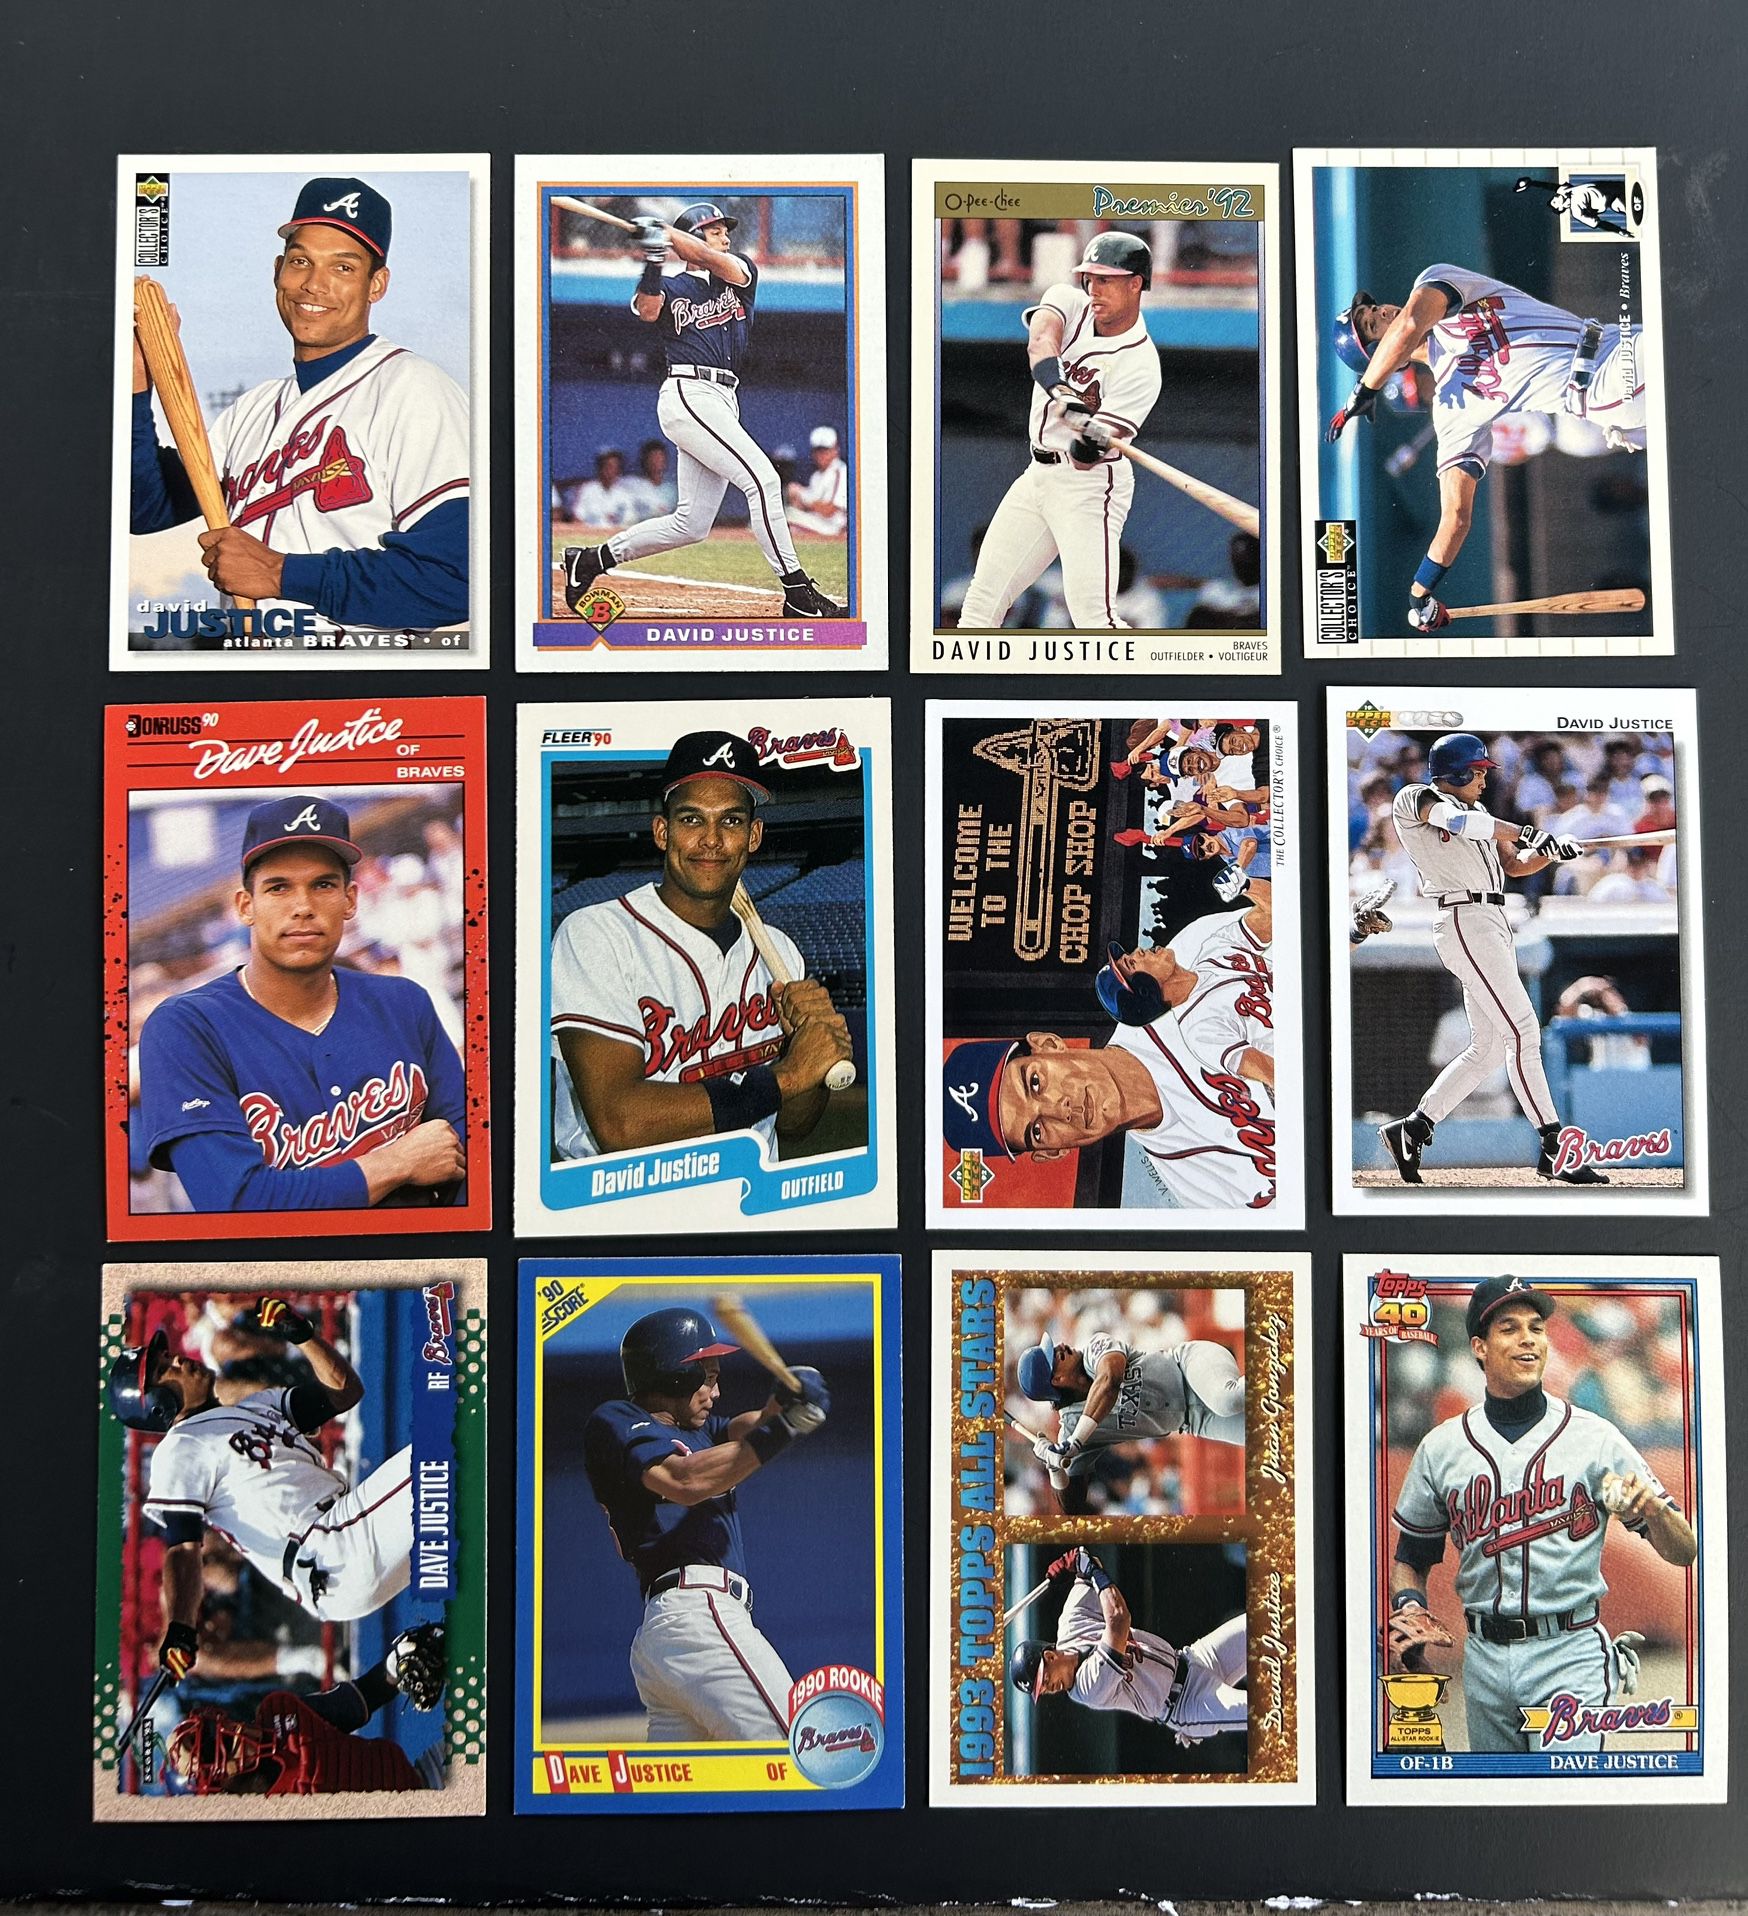 David Justice Rookie Baseball Card Lot for Sale in Columbia, MO